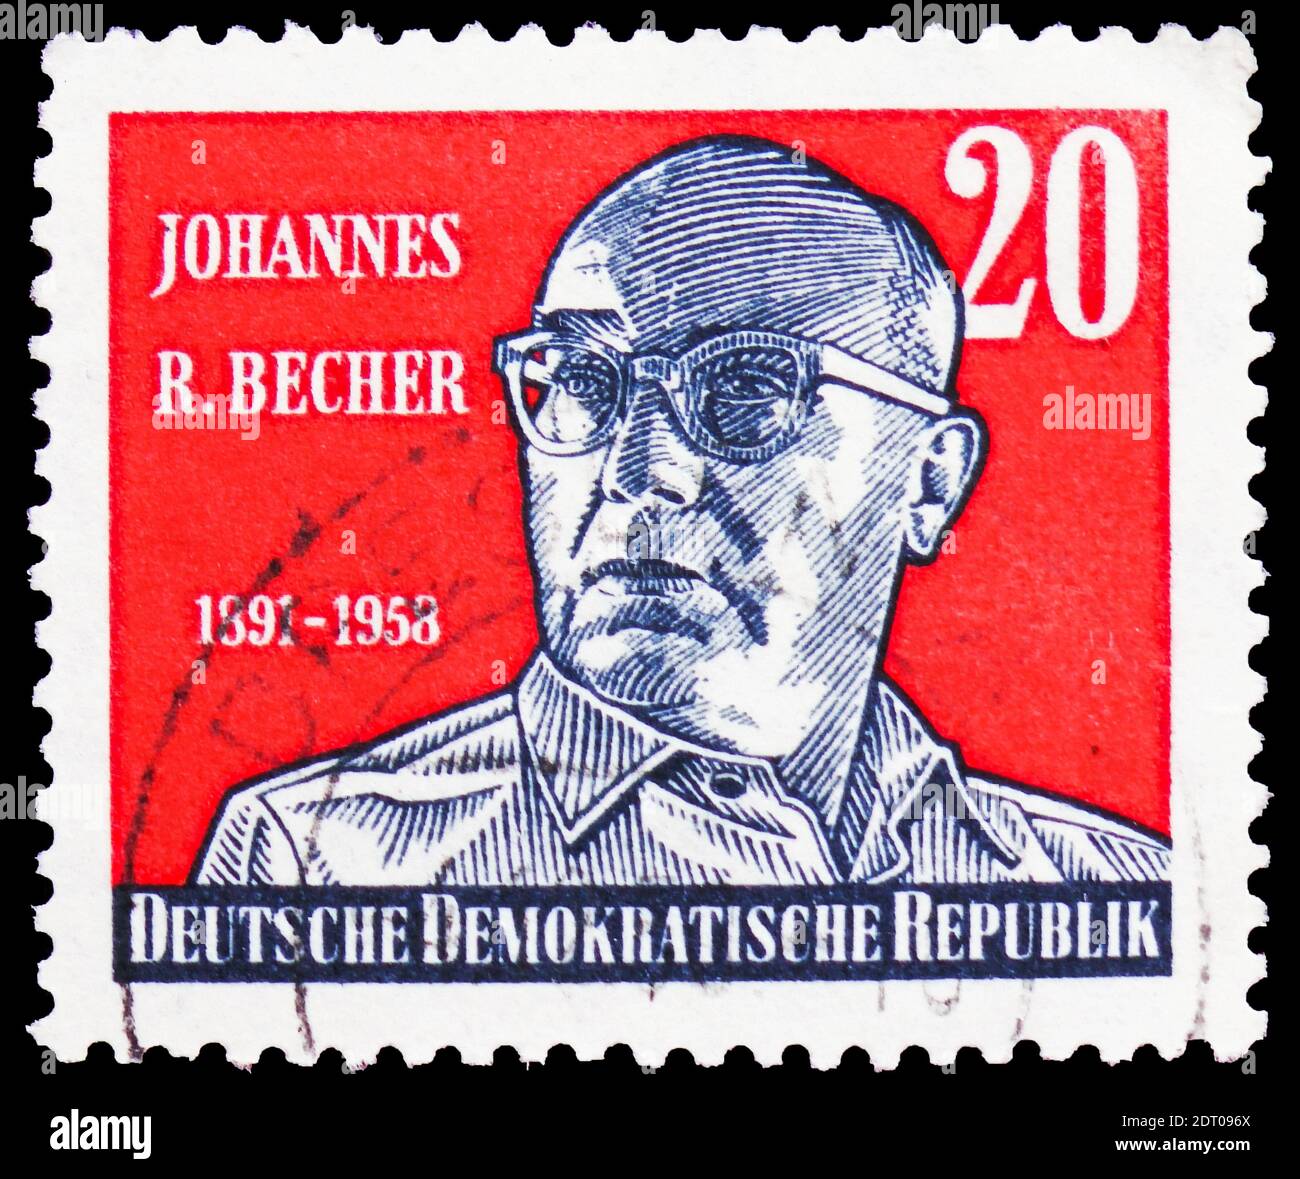 MOSCOW, RUSSIA - FEBRUARY 21, 2019: A stamp printed in Germany, Democratic Republic shows Johannes Robert Becher, serie, circa 1959 Stock Photo